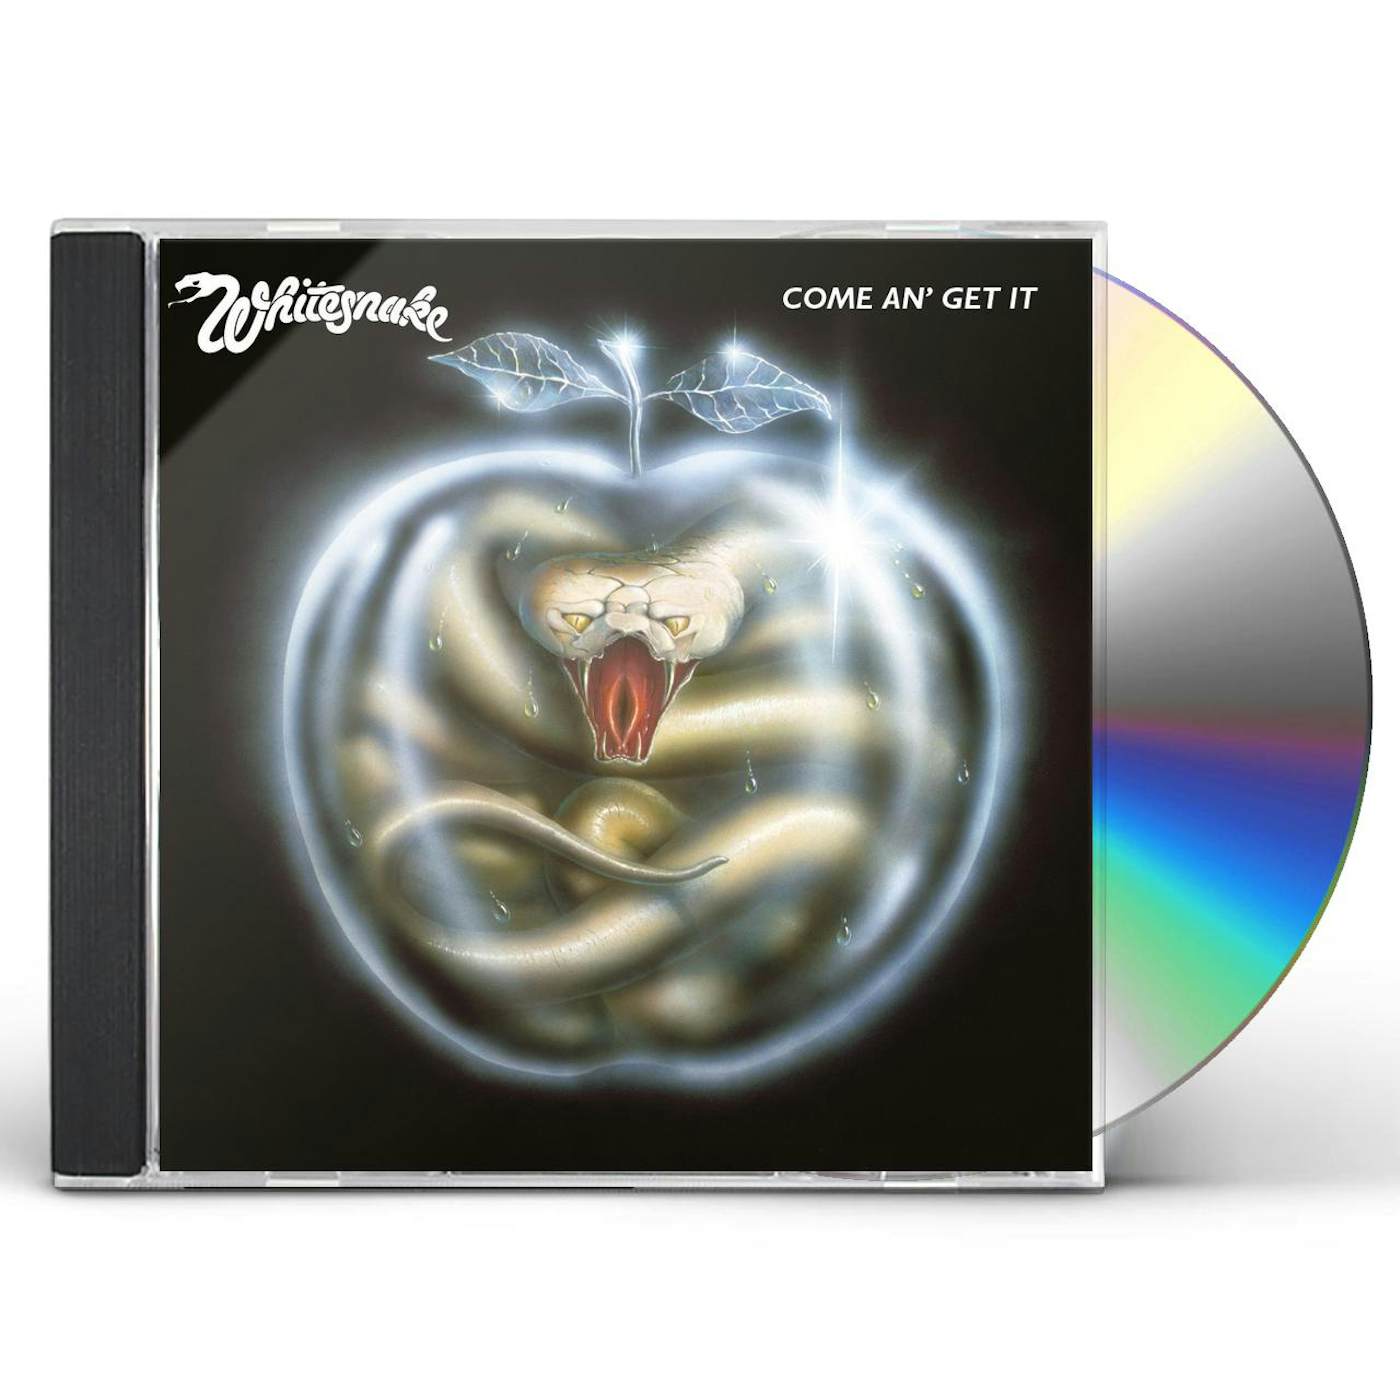 Whitesnake COME AN GET IT CD